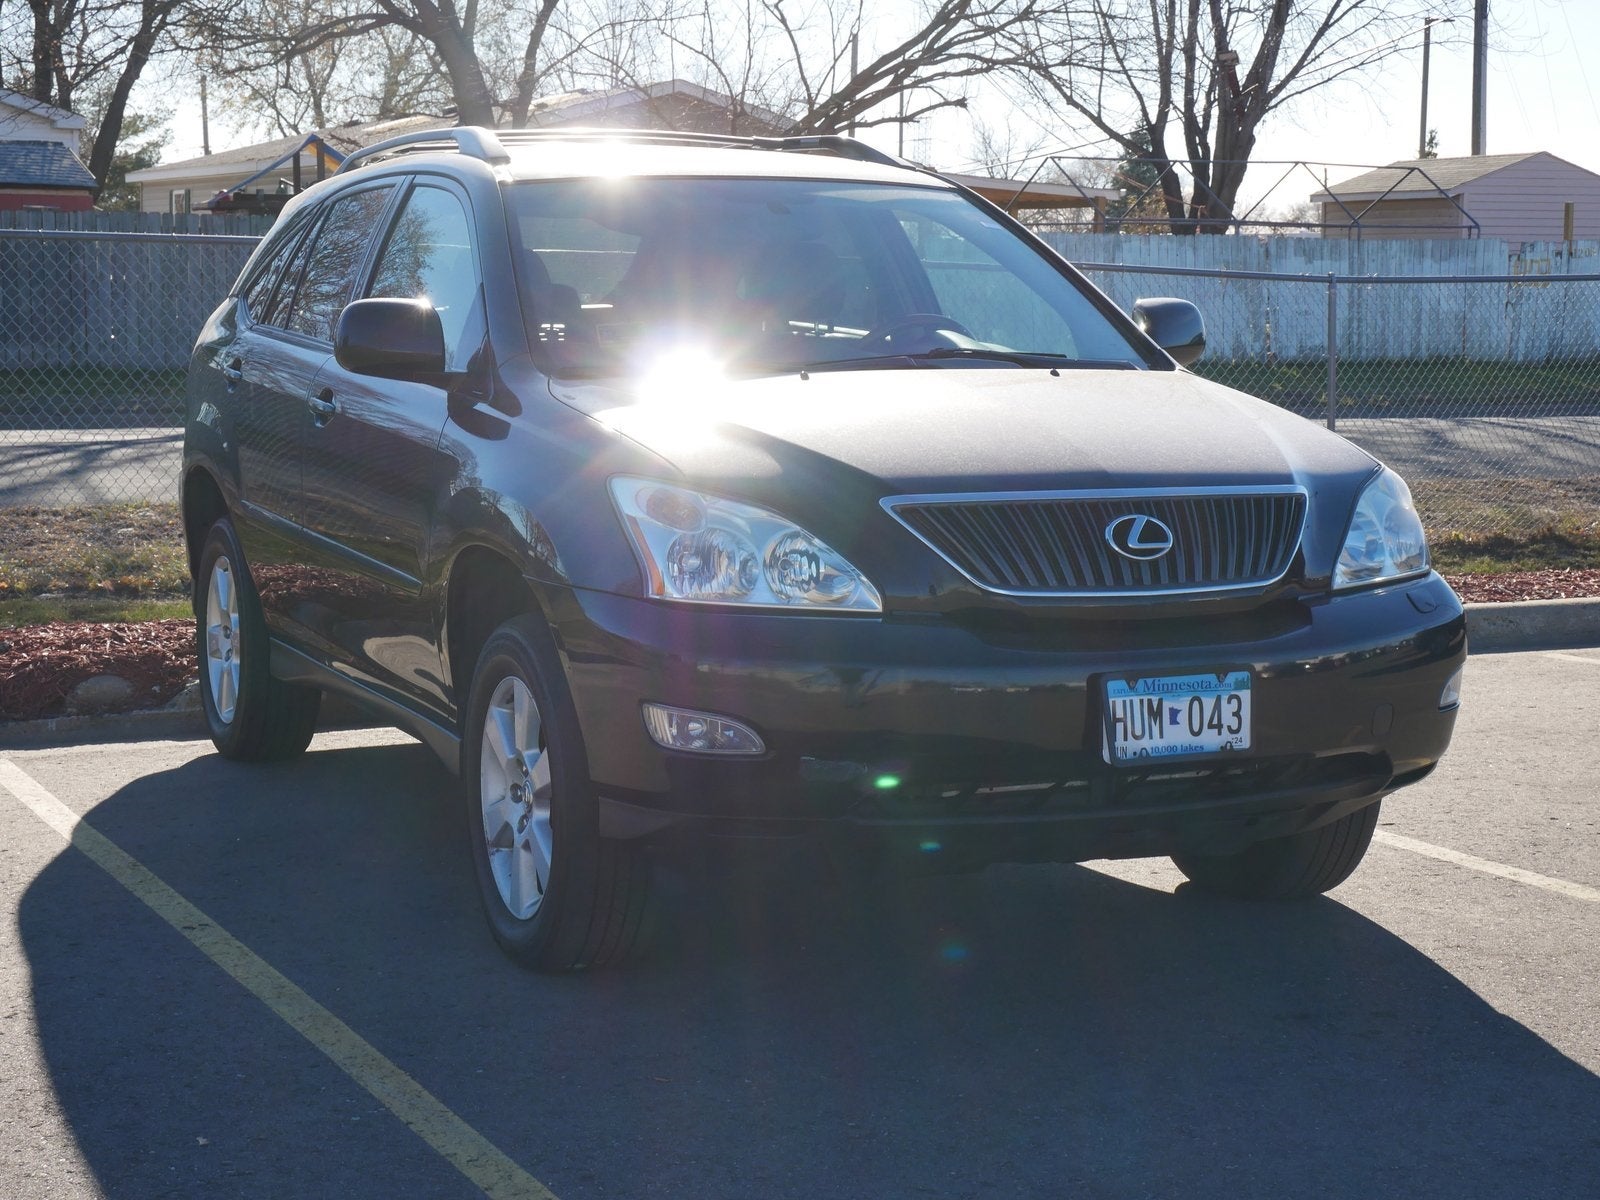 Used 2004 Lexus RX 330 with VIN JTJHA31U740058242 for sale in Fridley, Minnesota